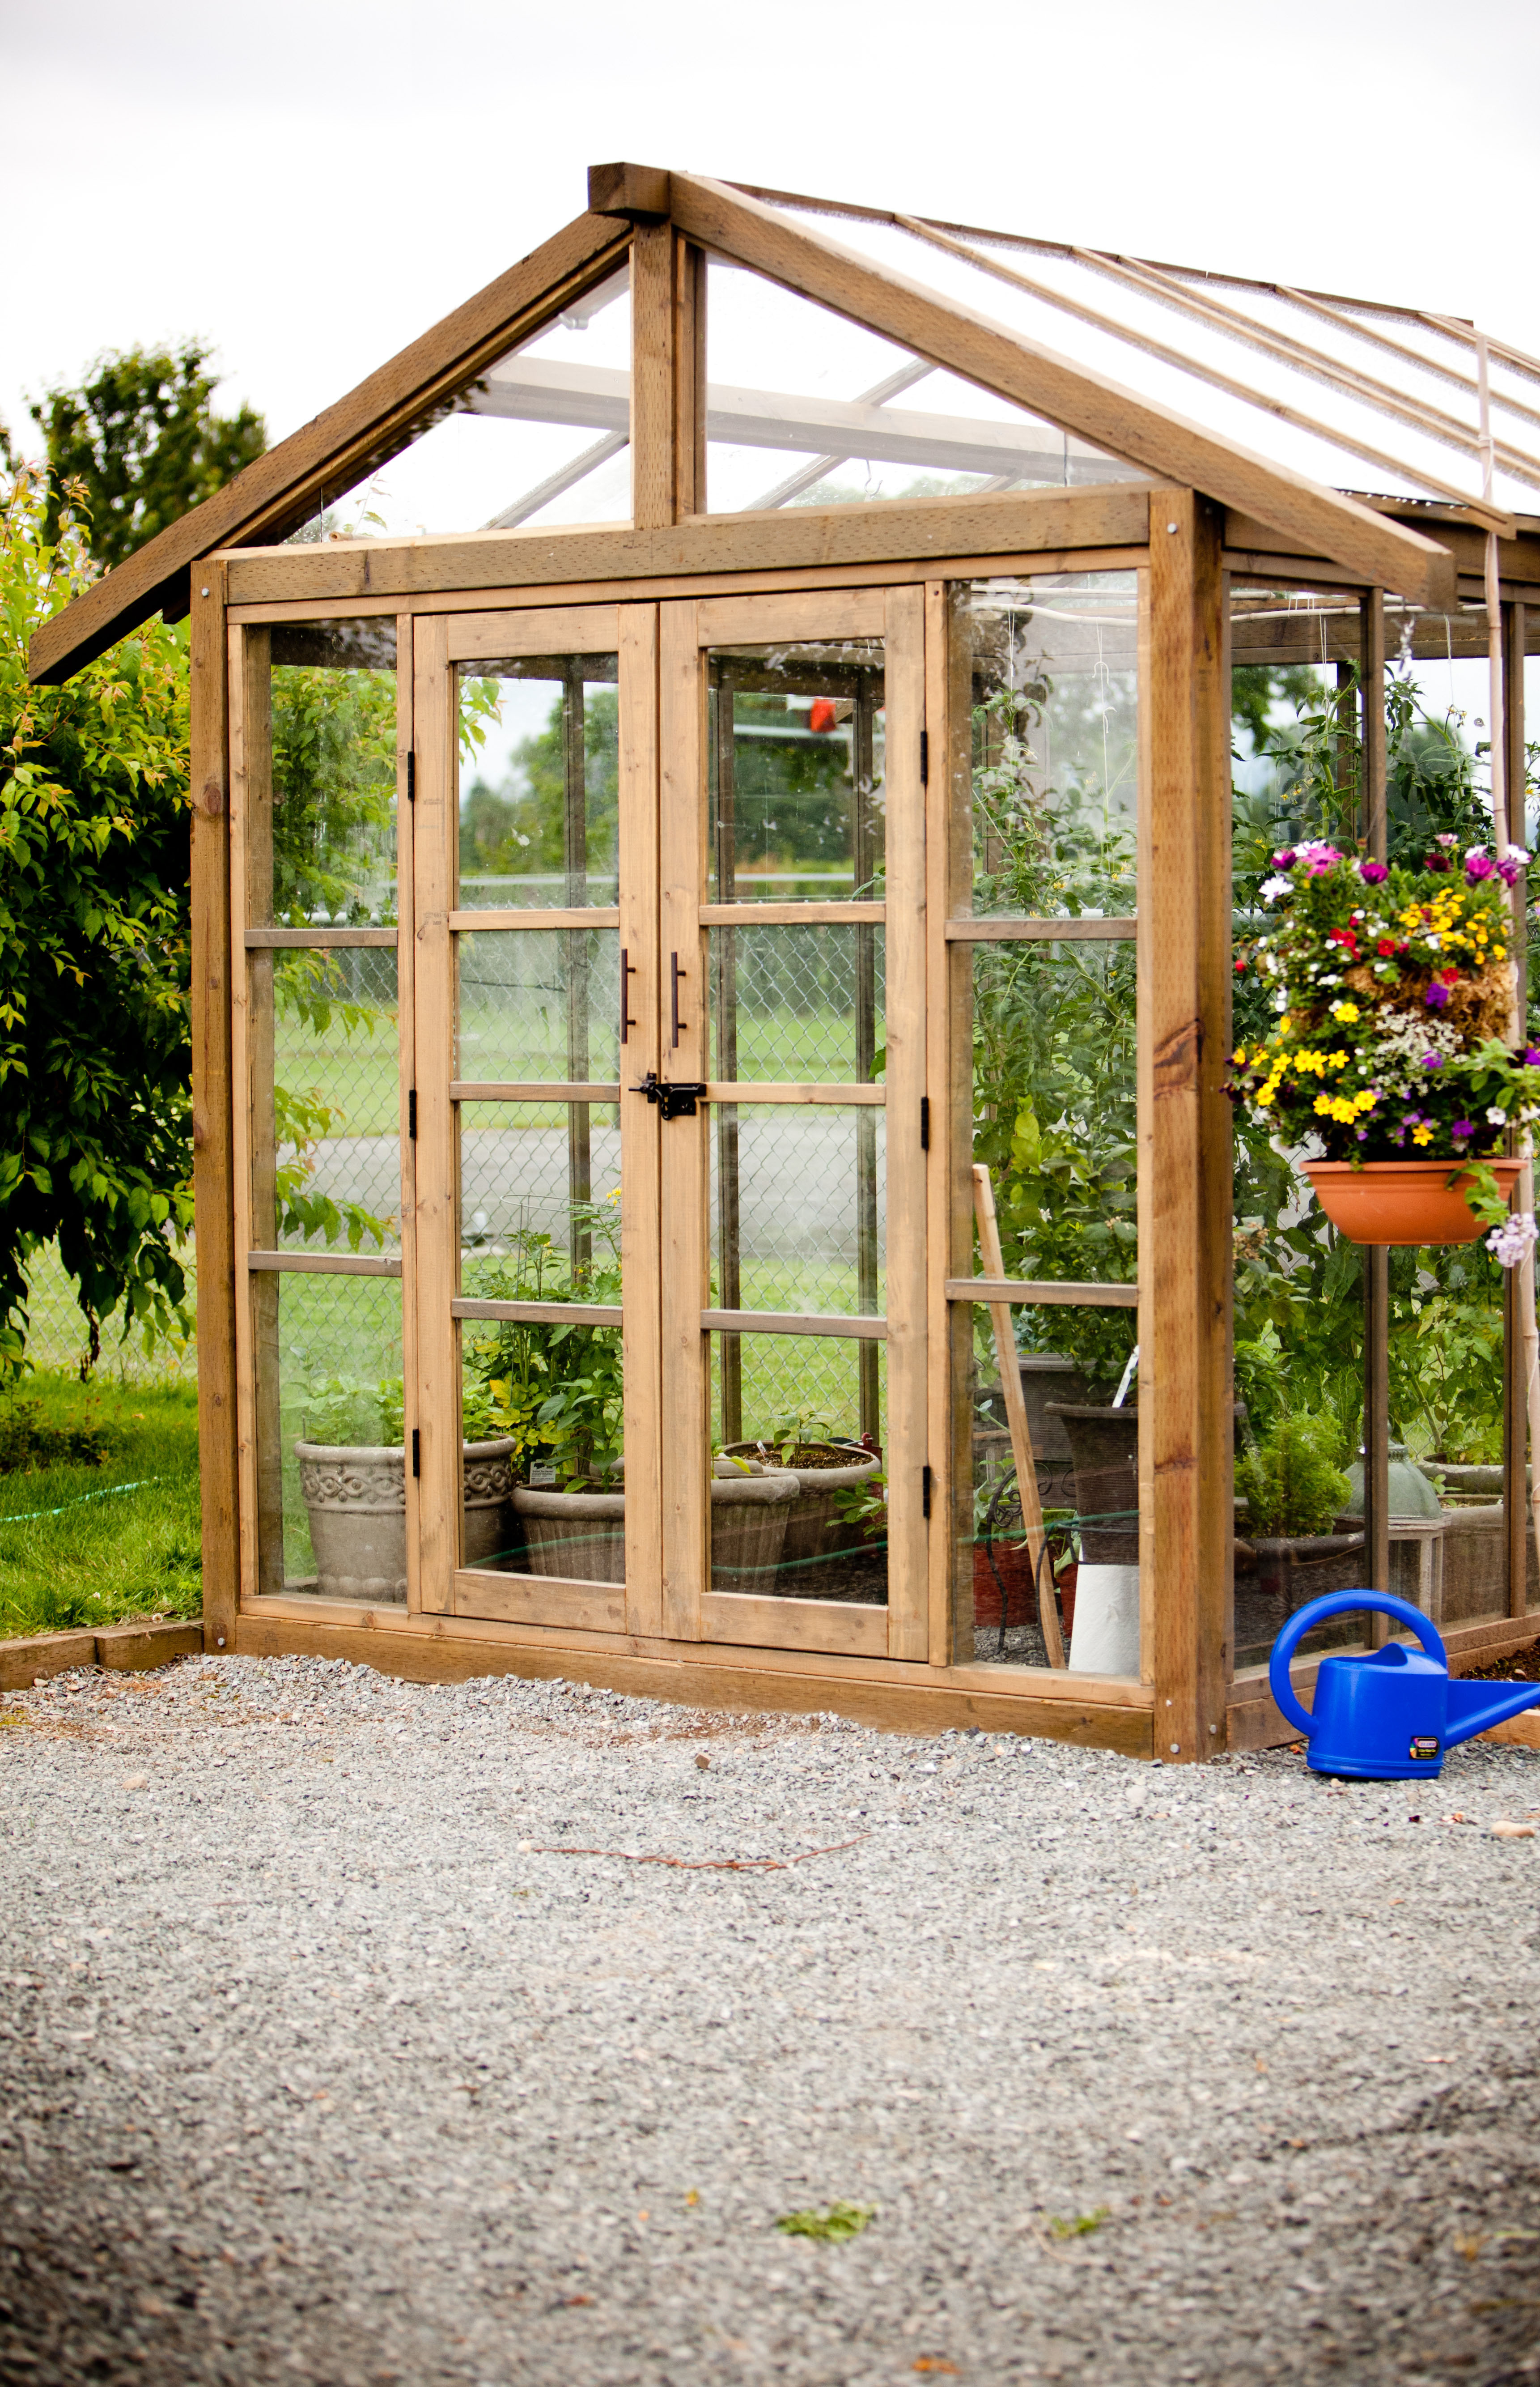 building a greenhouse | ..the secret life of daydreams..